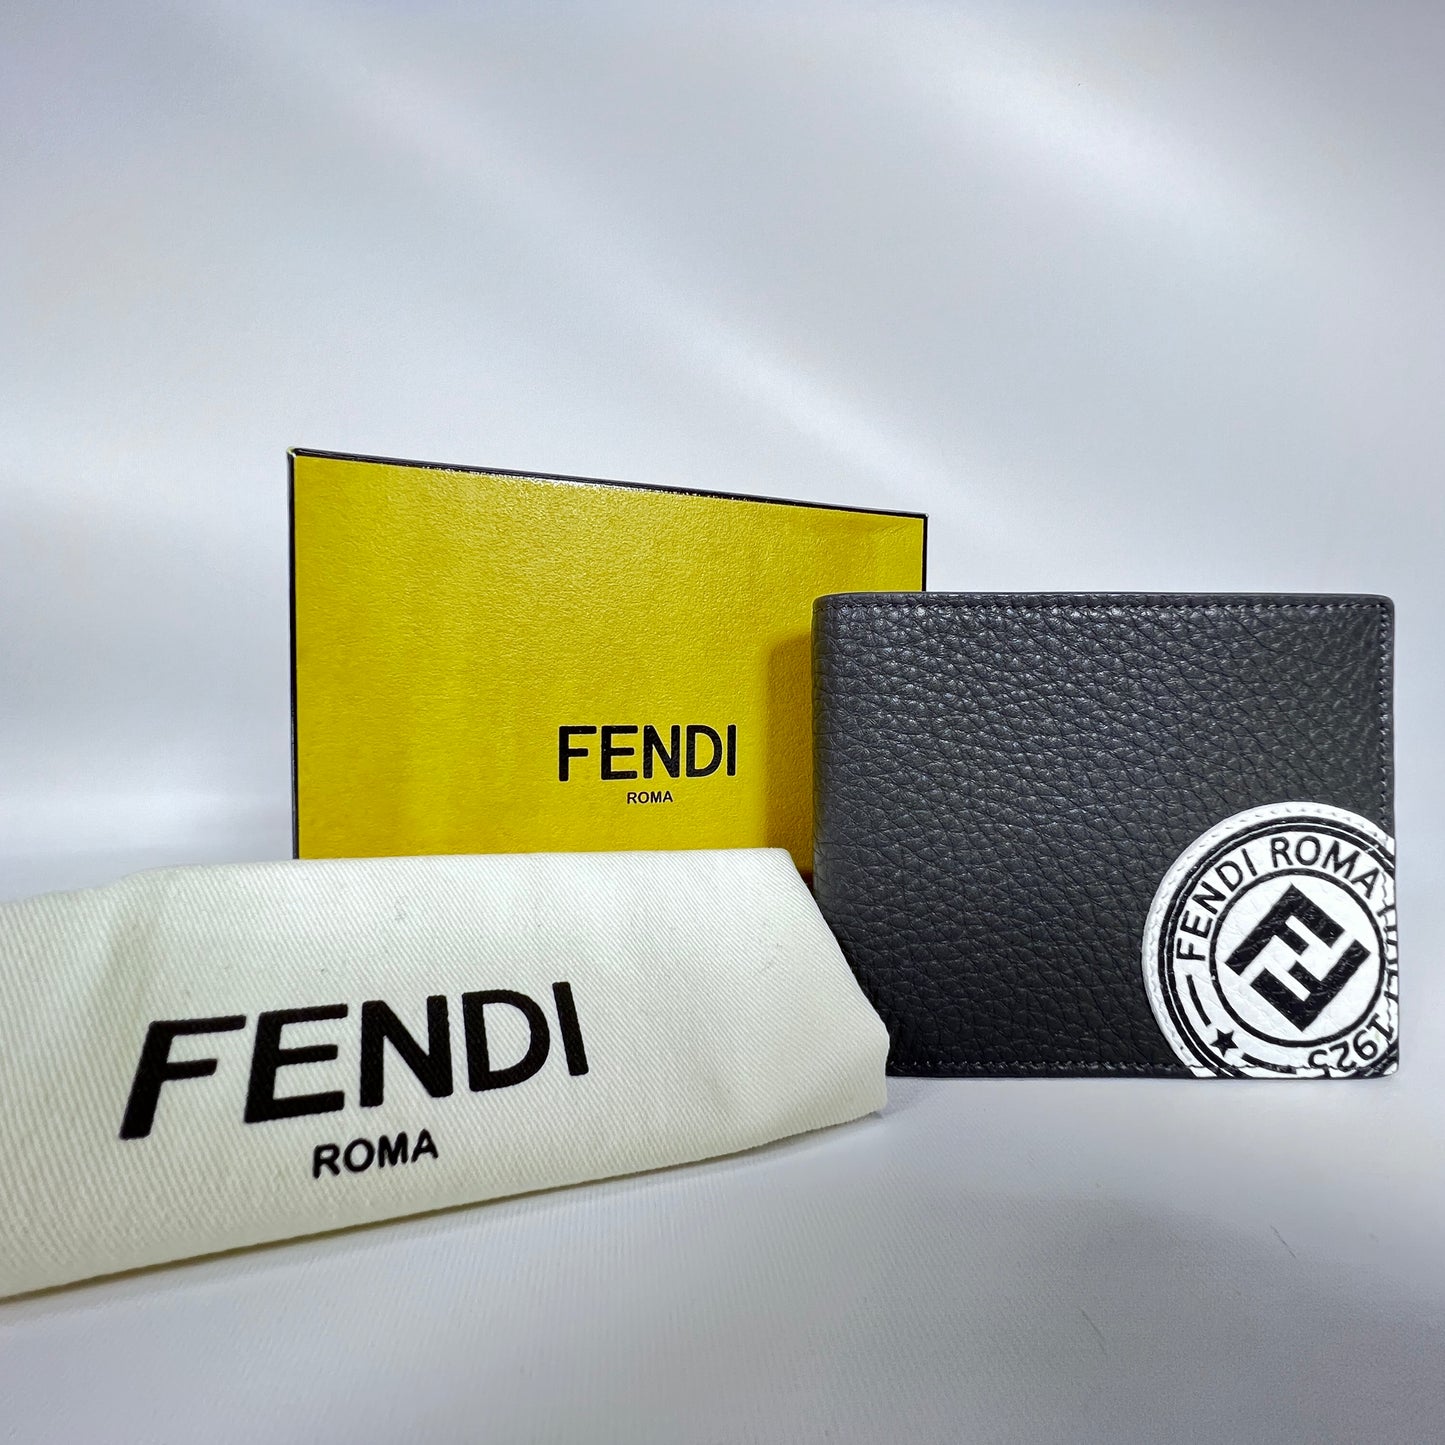 FENDI Men's Logo Stamp Leather Wallet NEW CONDITION